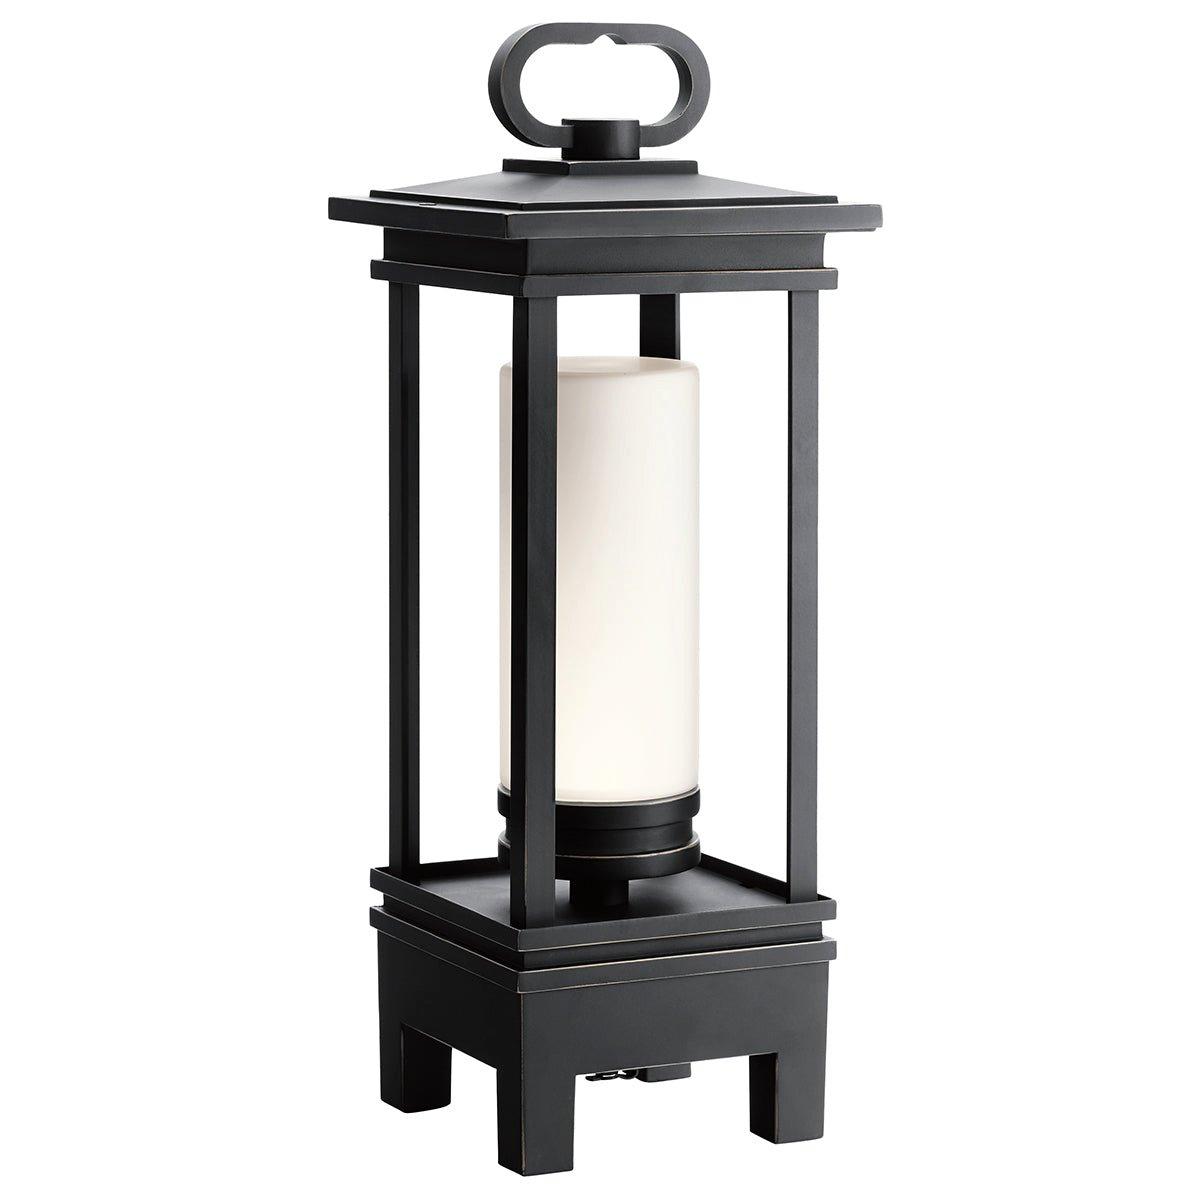 Outdoor IP44 Bluetooth Lantern Rubbed Bronze LED 3W Bulb Light Fitting d01813